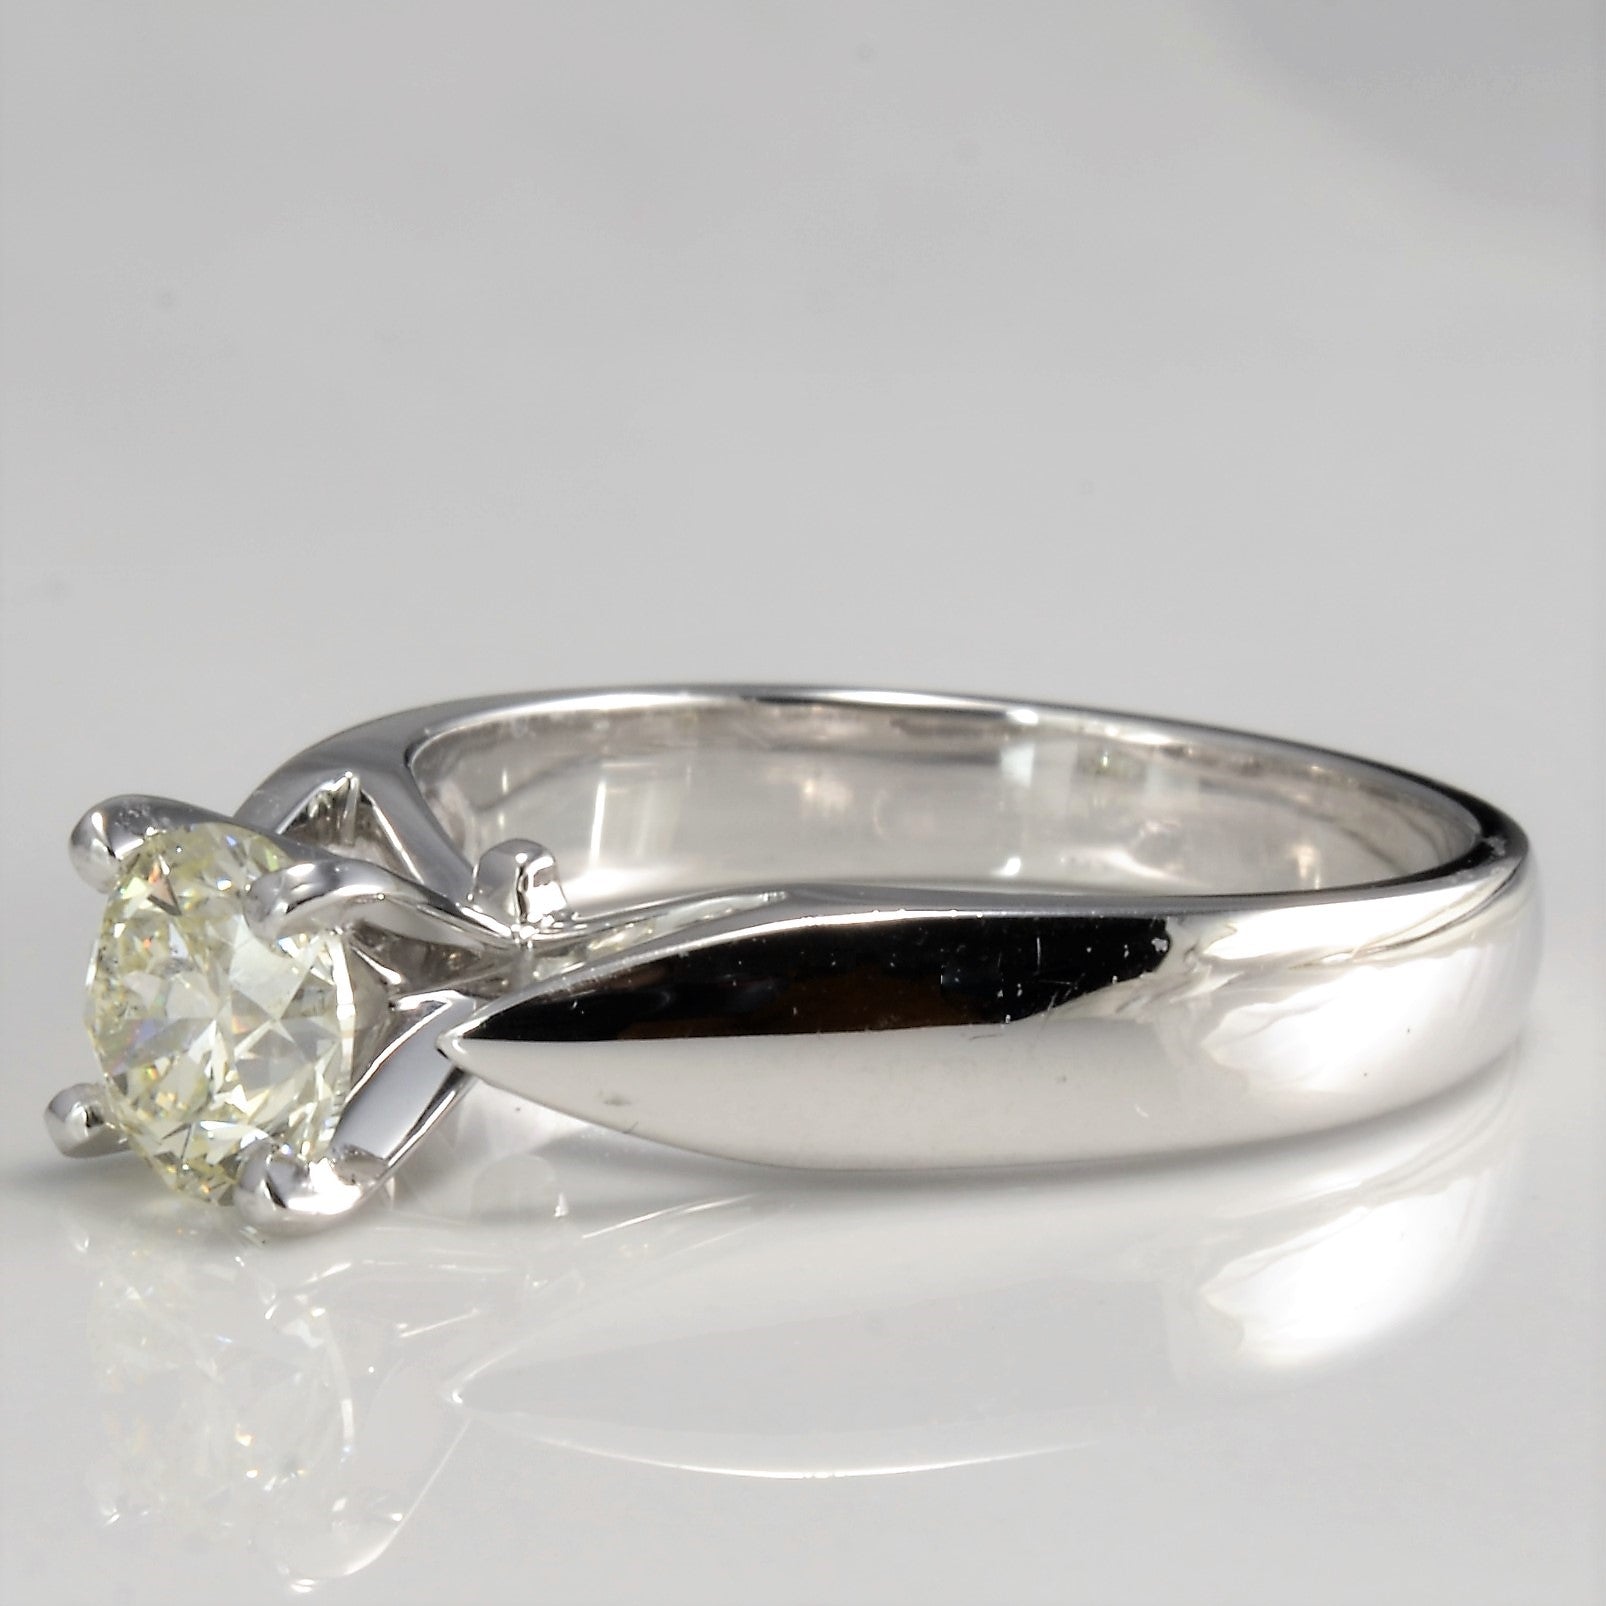 Tapered Solitaire Diamond Ring | 0.77 ct, SZ 6.25 |